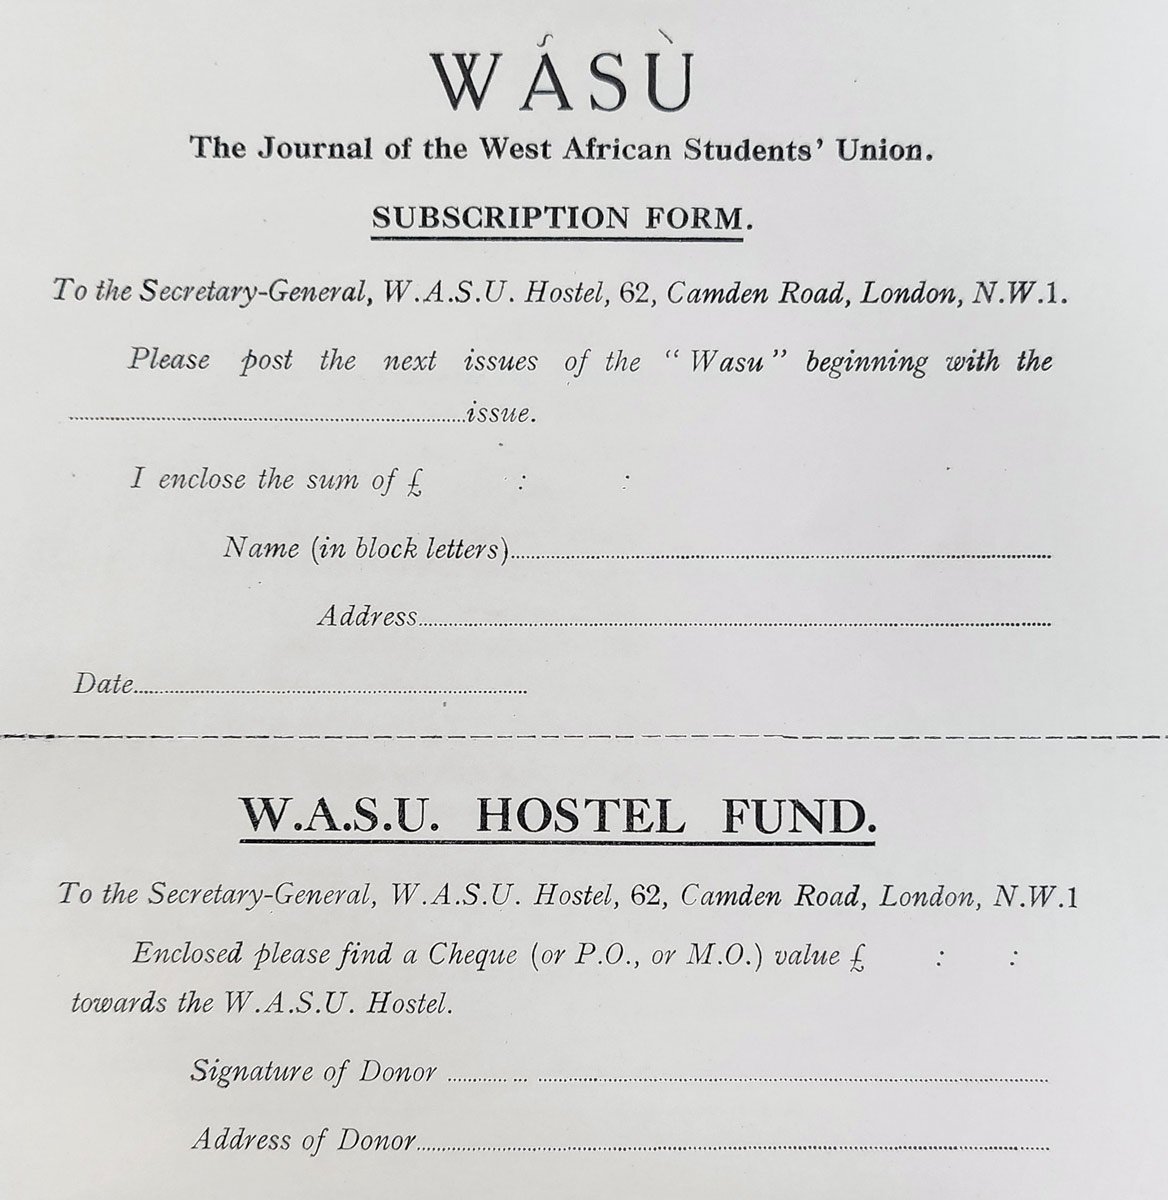 Two forms, one to subscribe to the WASU journal and another to donate to the WASU Hostel fund.